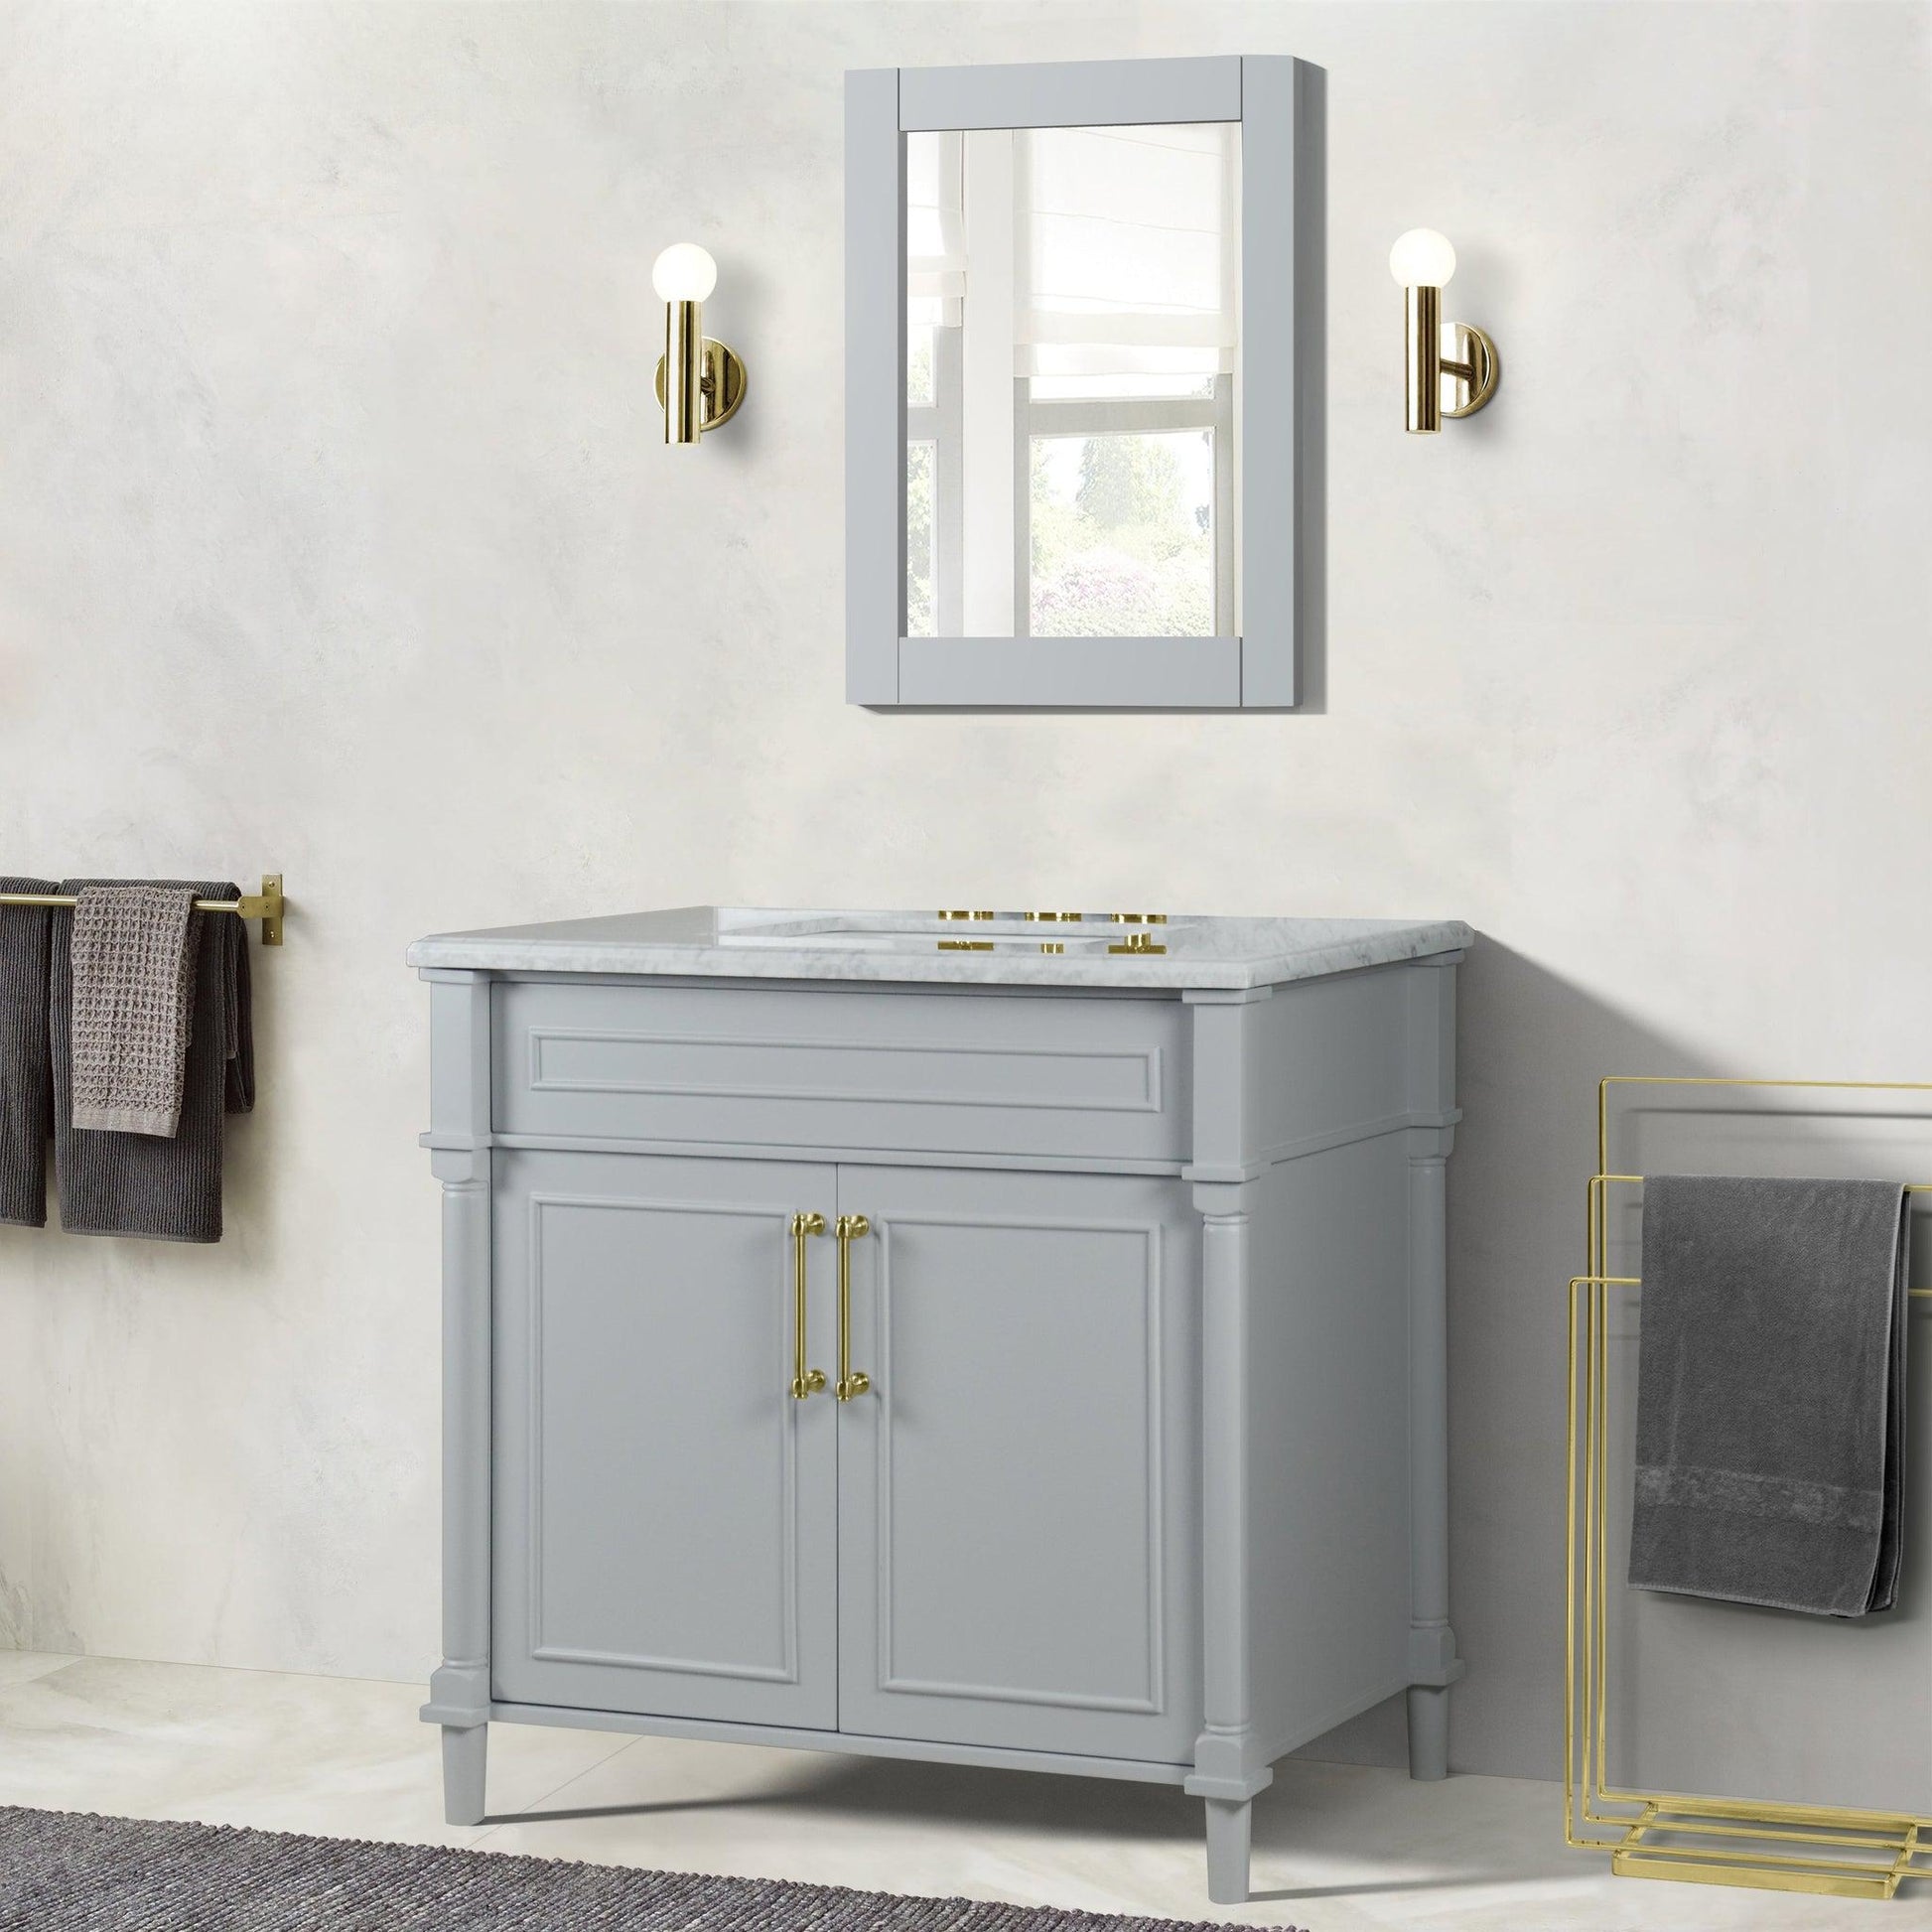 Bellaterra Home Napa 36" 2-Door Gray Freestanding Vanity Set With Ceramic Undermount Rectangular Sink and White Carrara Marble Top, and Gold Hardware